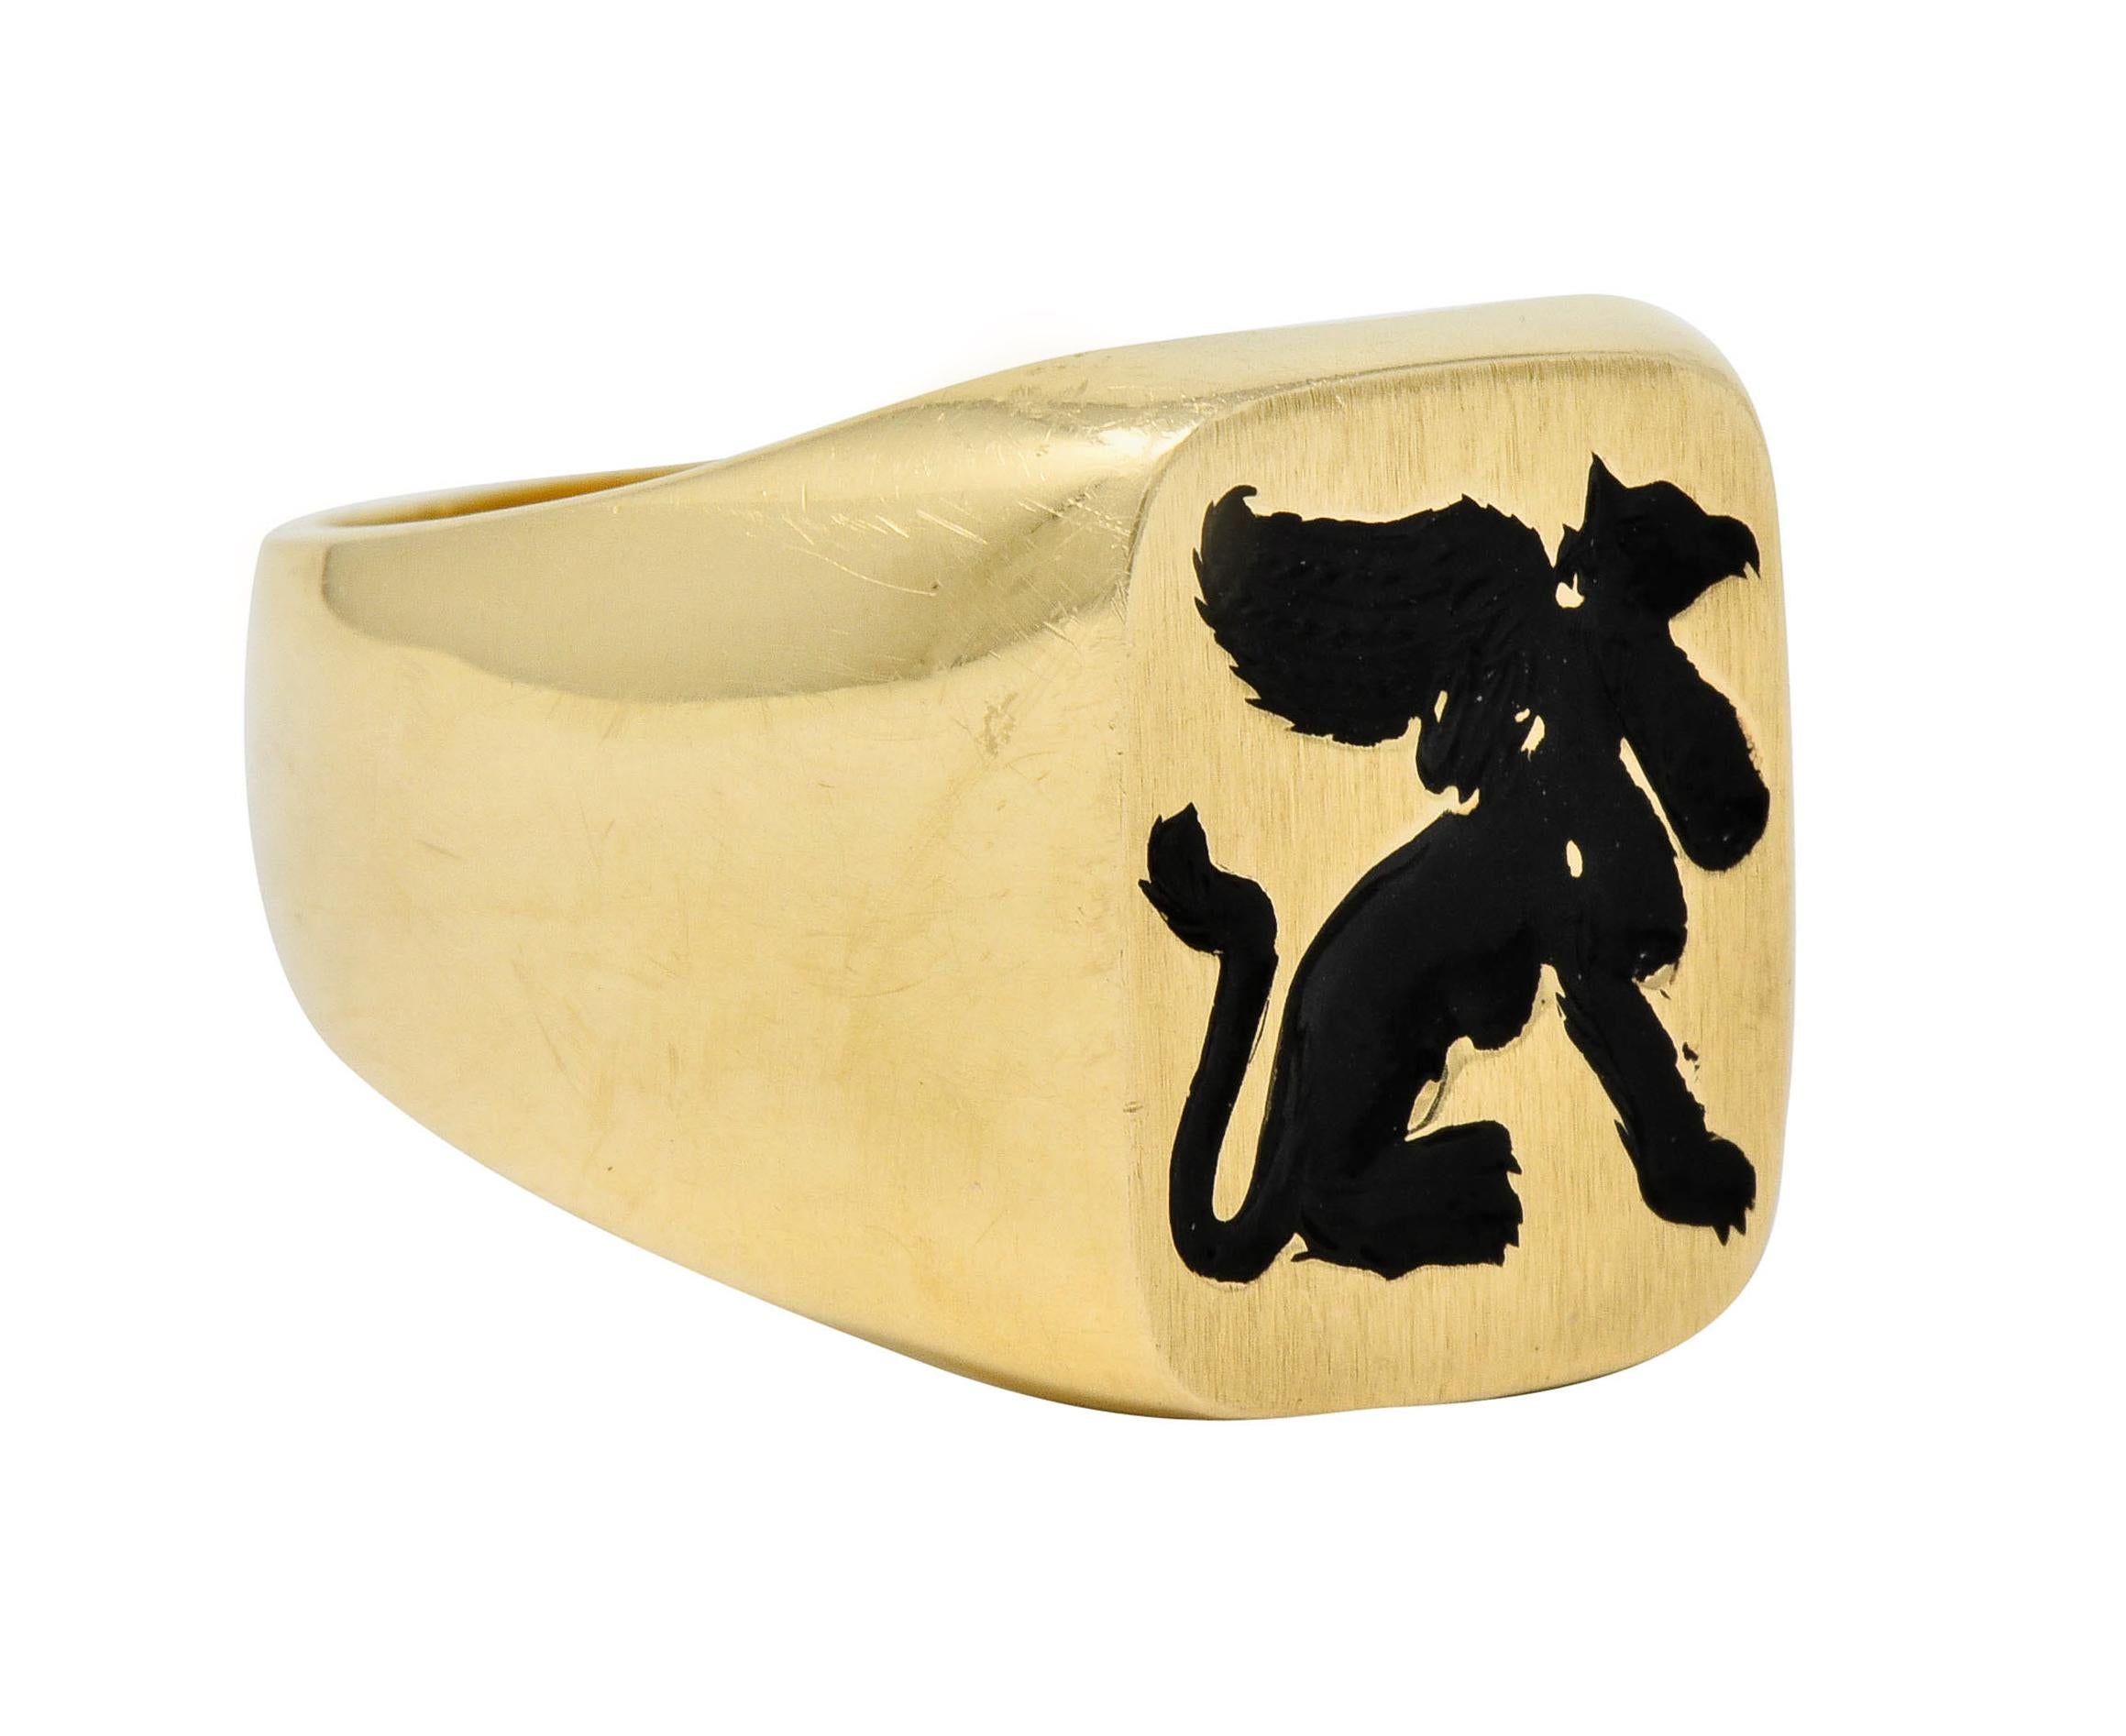 Signet style ring deeply engraved to depict the silhouette of a winged gryphon

Glossed with black enamel exhibiting some loss; consistent with age, wear, and use

Cushion shaped face features a lightly brushed finish while remainder of ring is